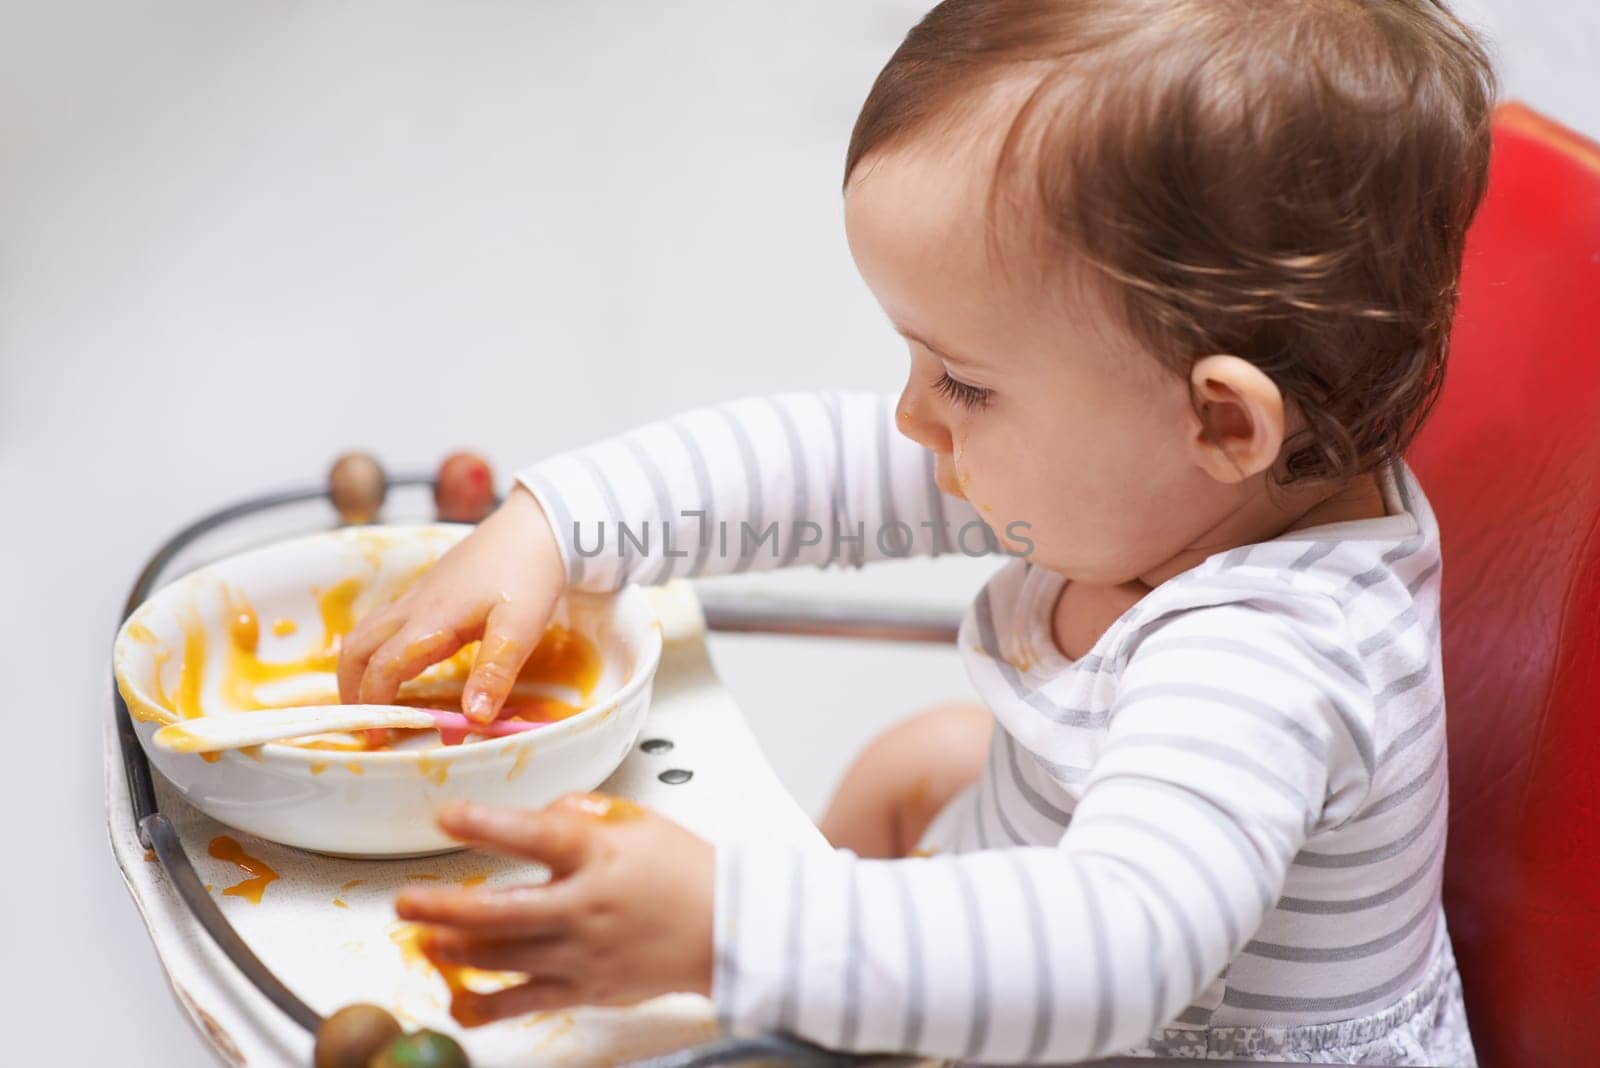 Eating, puree and girl baby in chair with vegetable food for child development at home. Cute, nutrition and hungry young kid or toddler enjoying healthy lunch, dinner or supper meal at house